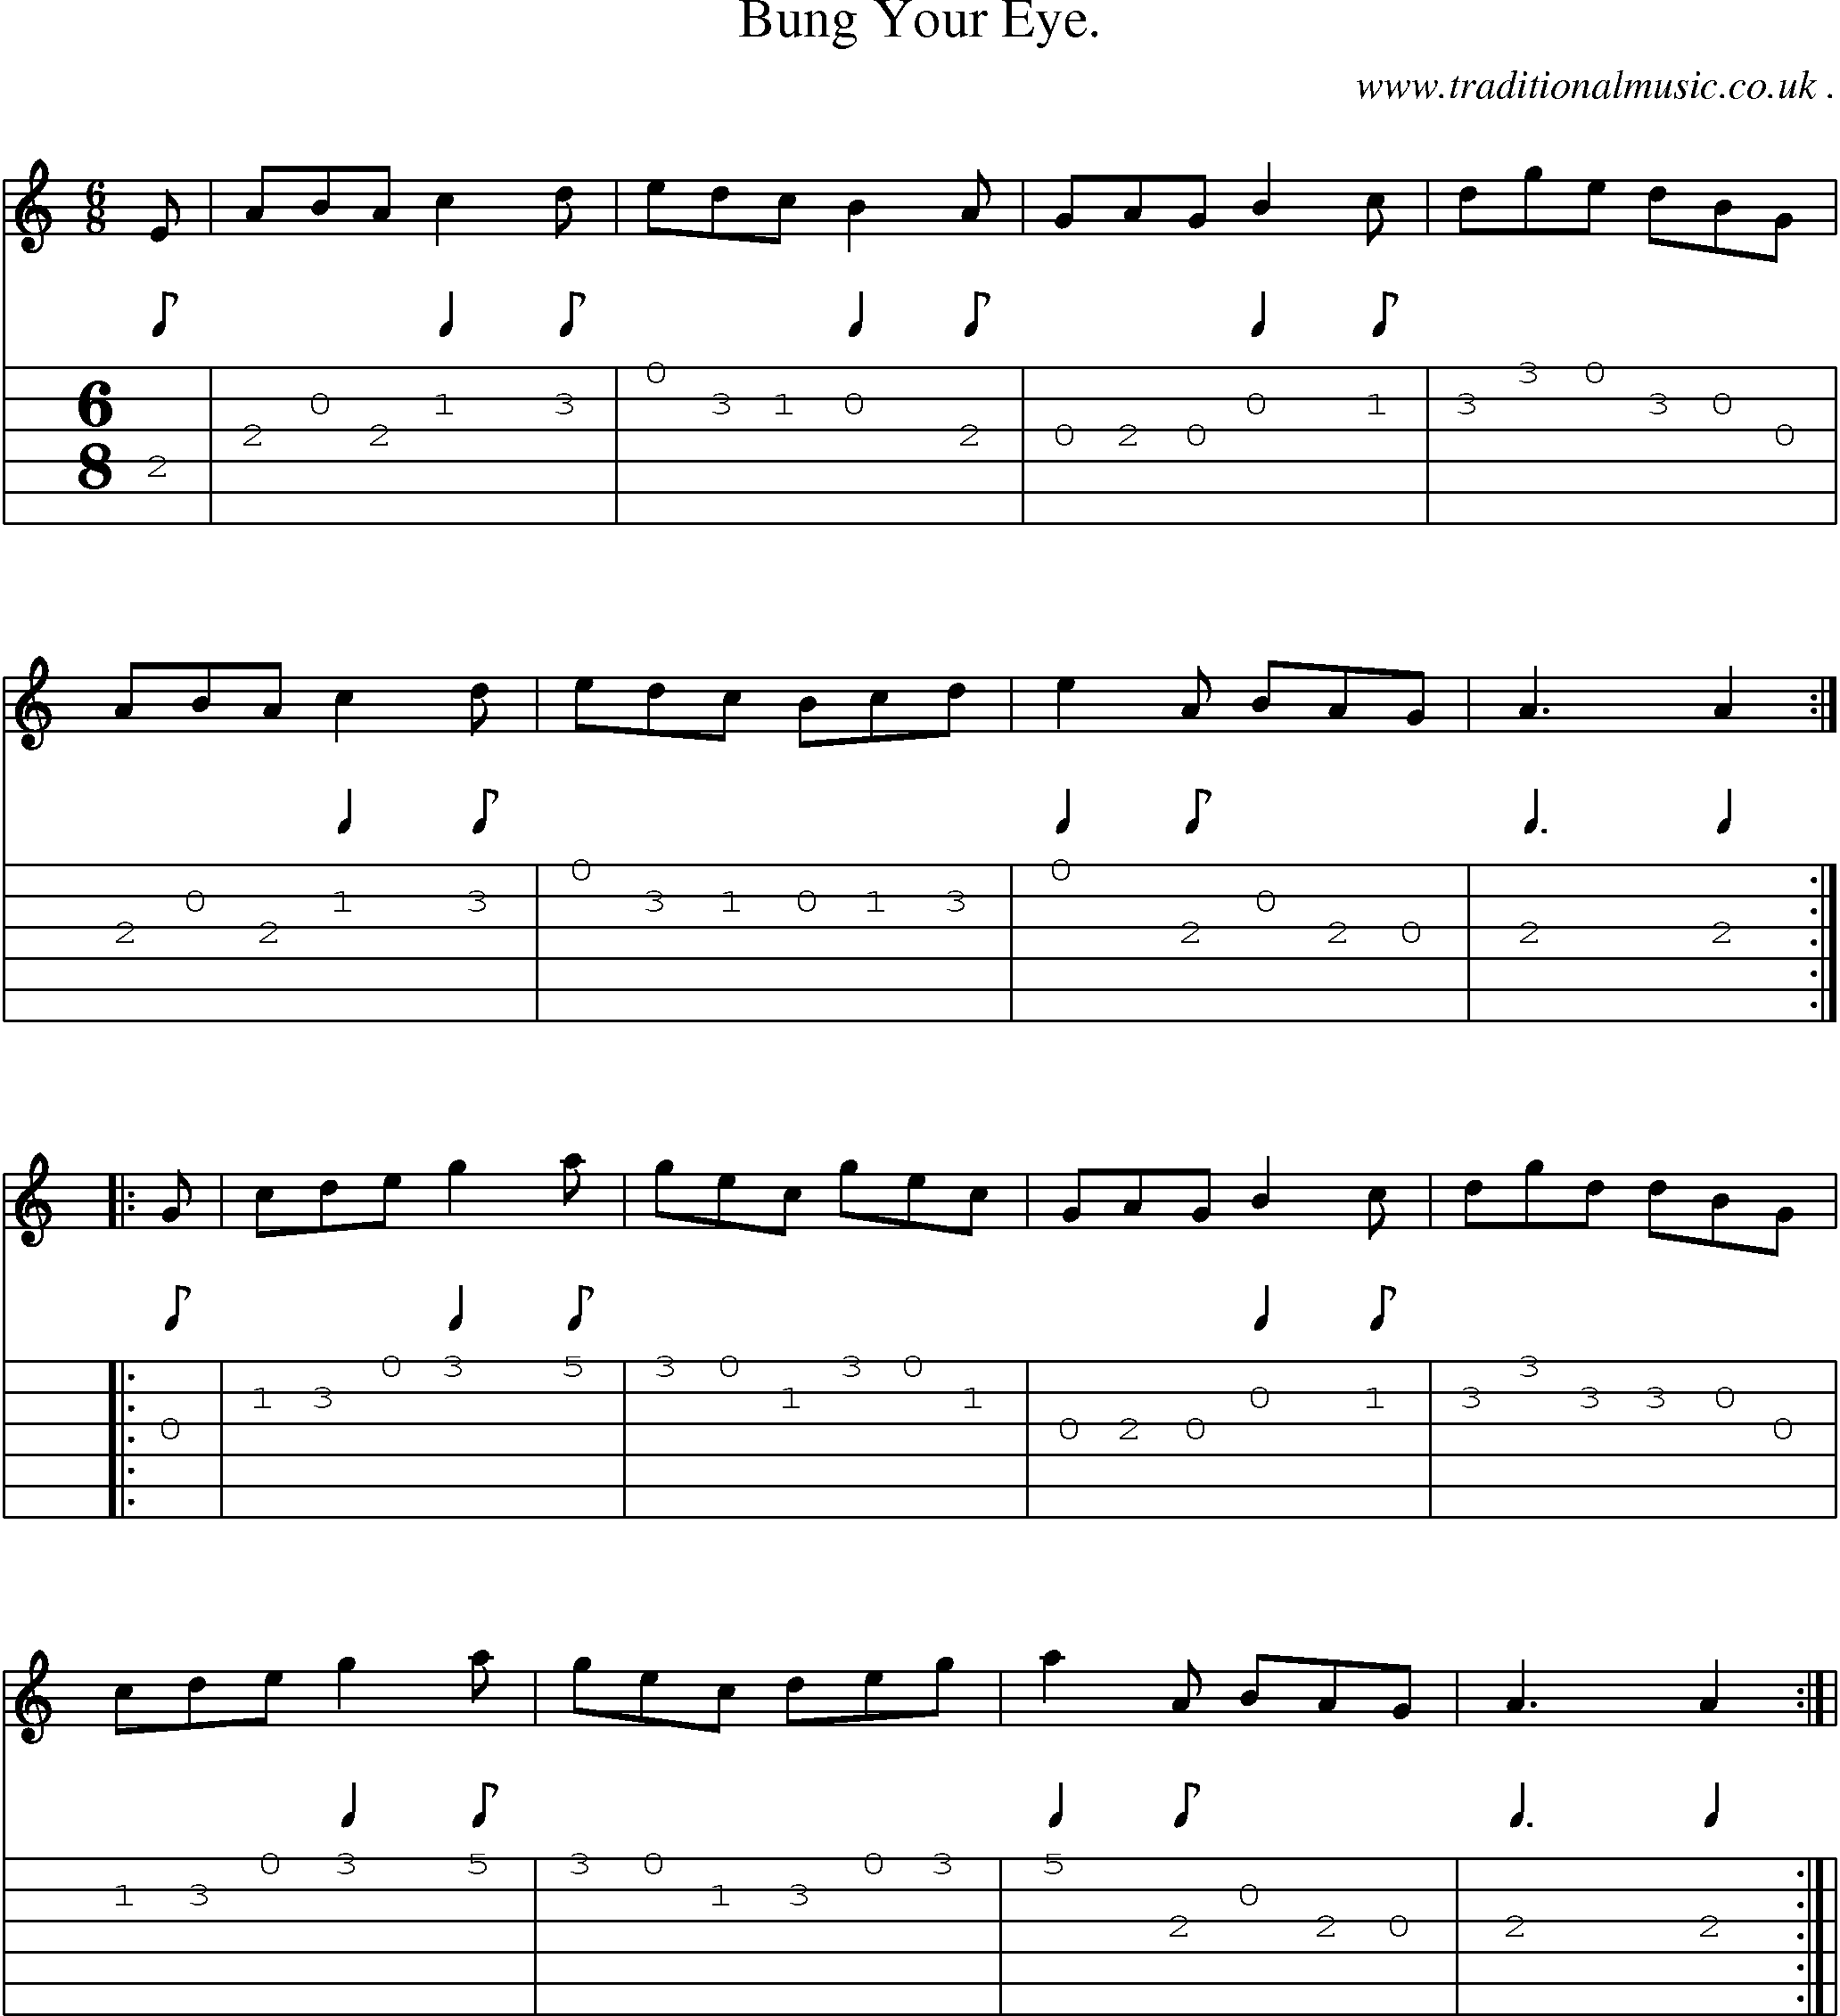 Sheet-Music and Guitar Tabs for Bung Your Eye